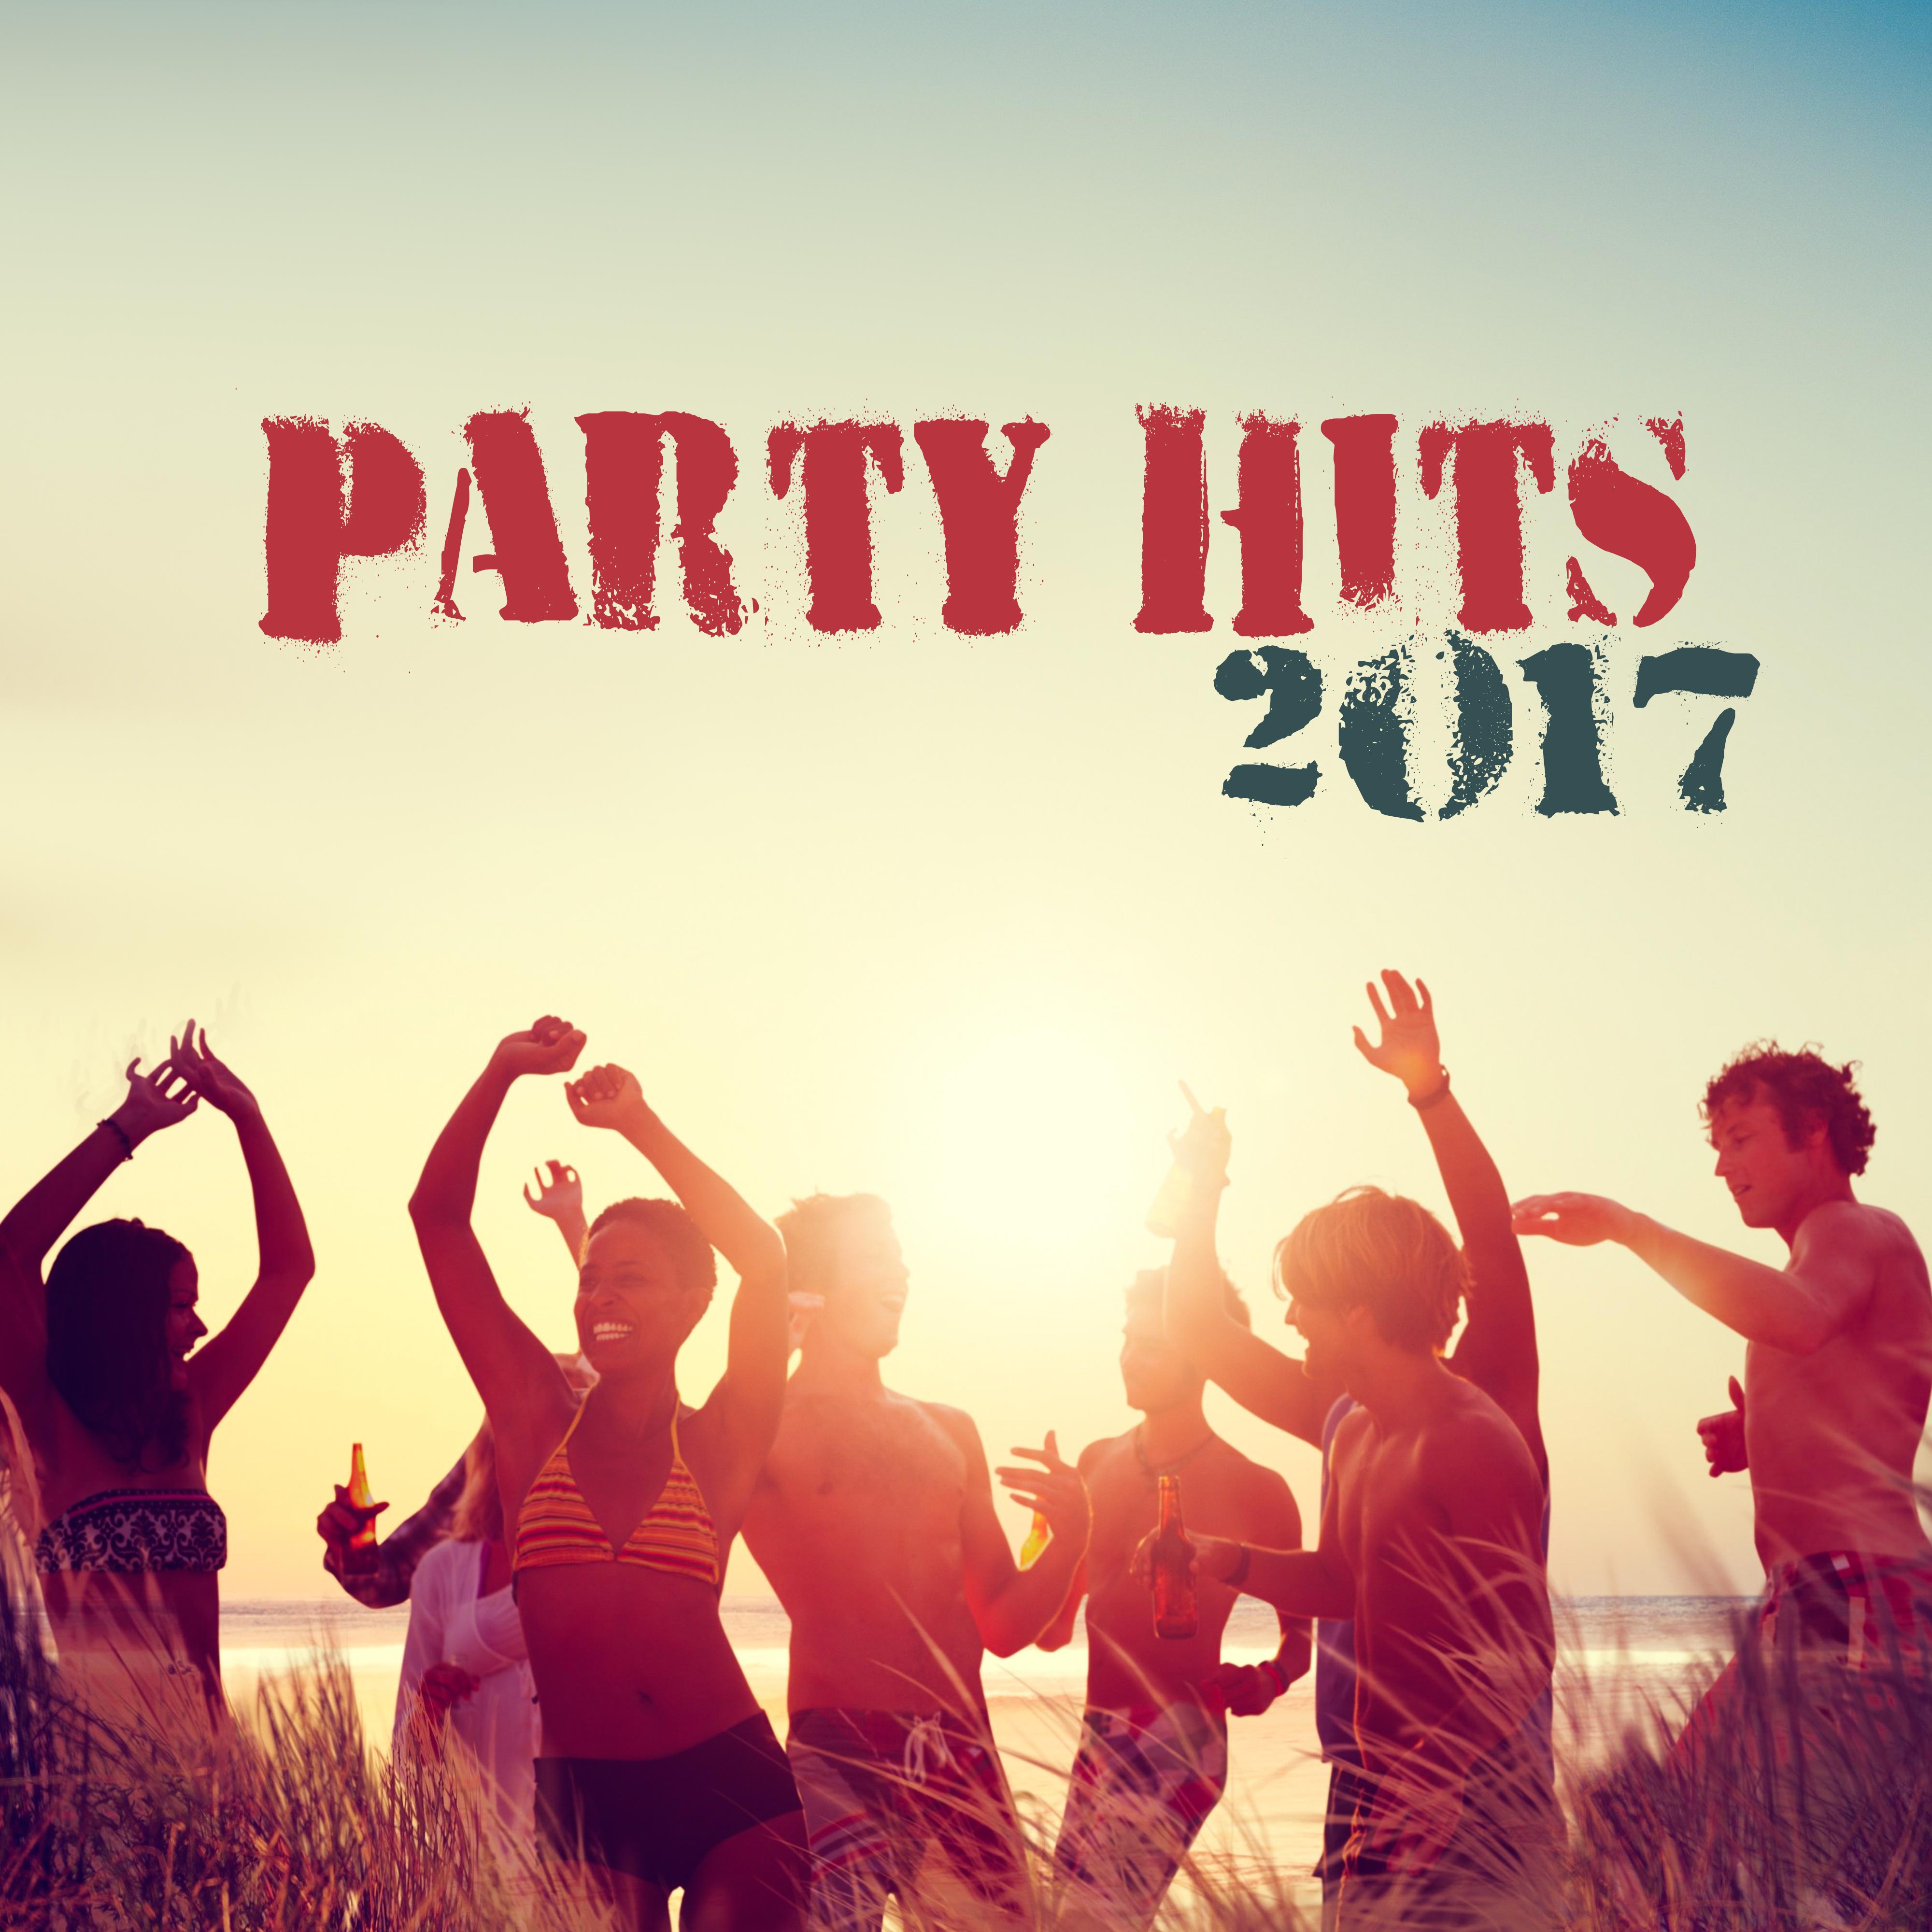 Party Hits 2017 – Chill Out 2017, Lounge, Summer Chillout, Dance Music, Beach House, Mr Chillout